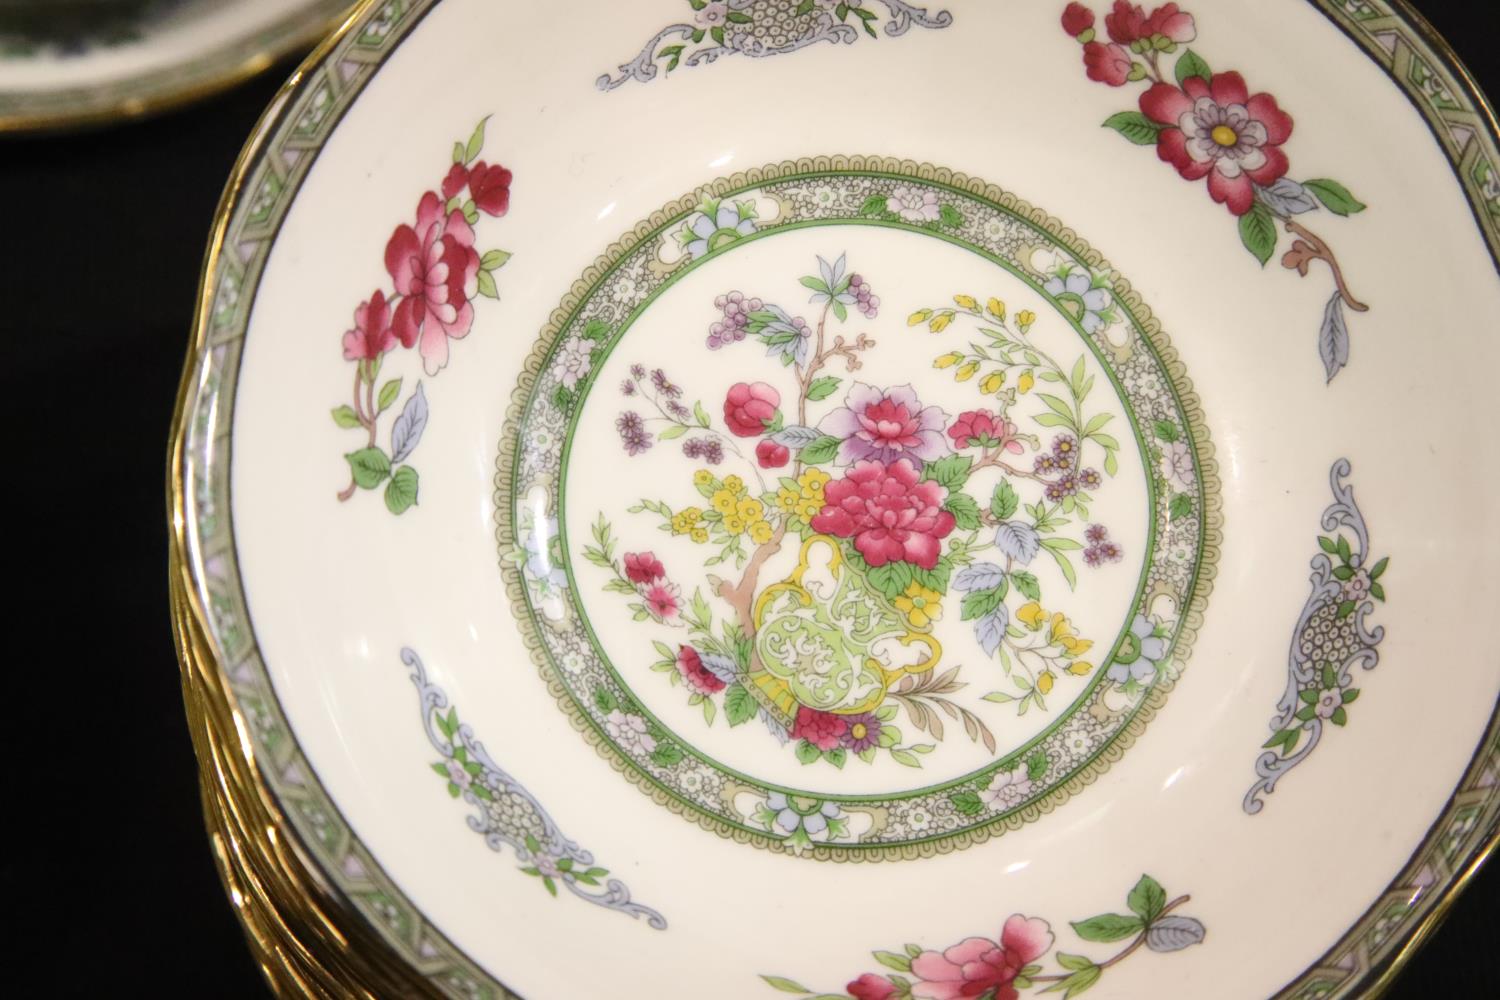 Paragon Tree of Kashmir pattern dinner service including dinner plates, salad plates, bowls cups and - Image 2 of 5